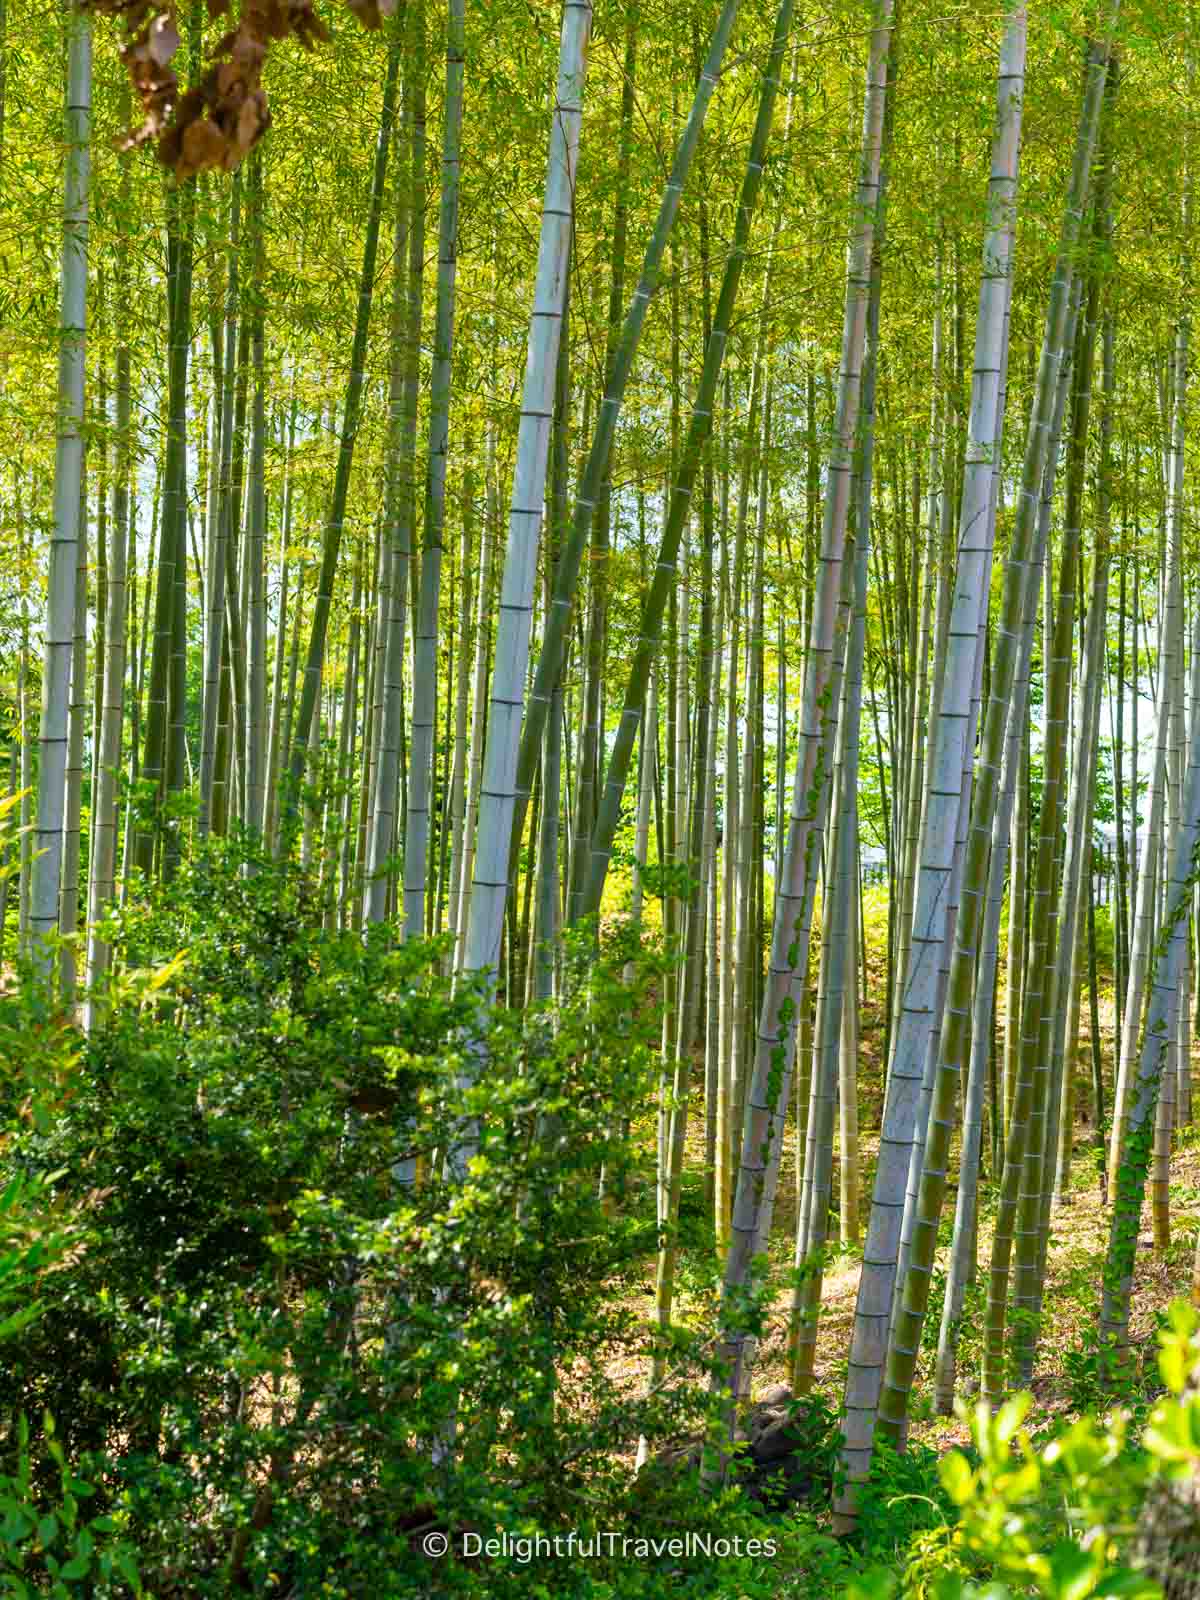 Bamboo groves at Open-air Museum of Old Japanese Farmhouses in Osaka.